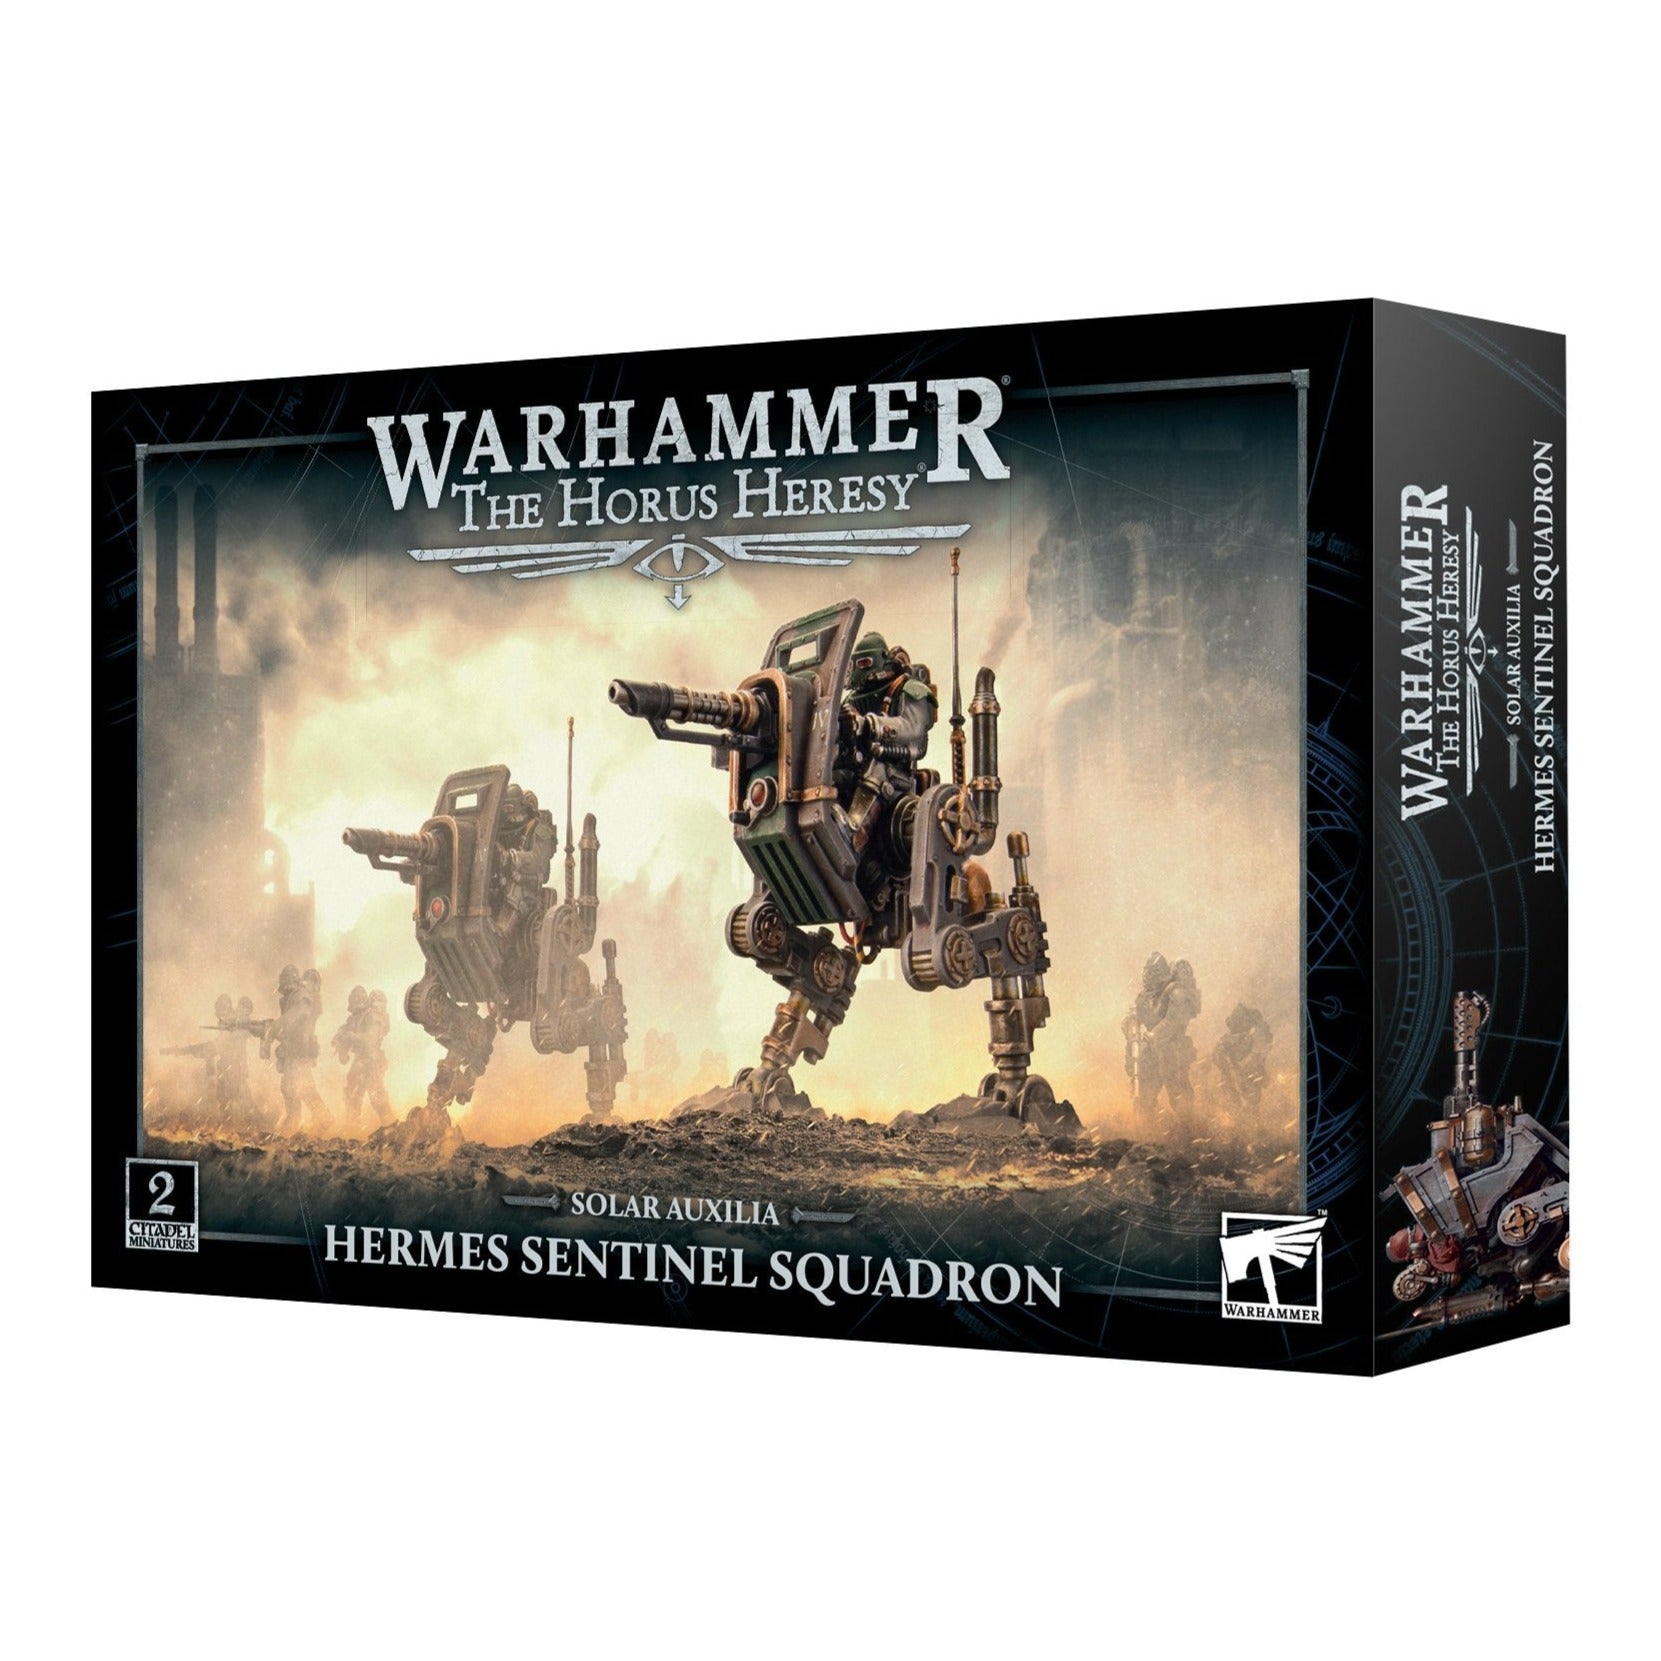 Solar Auxilia: Hermes Sentinel Squadron - Release Date 11/5/24 - Loaded Dice